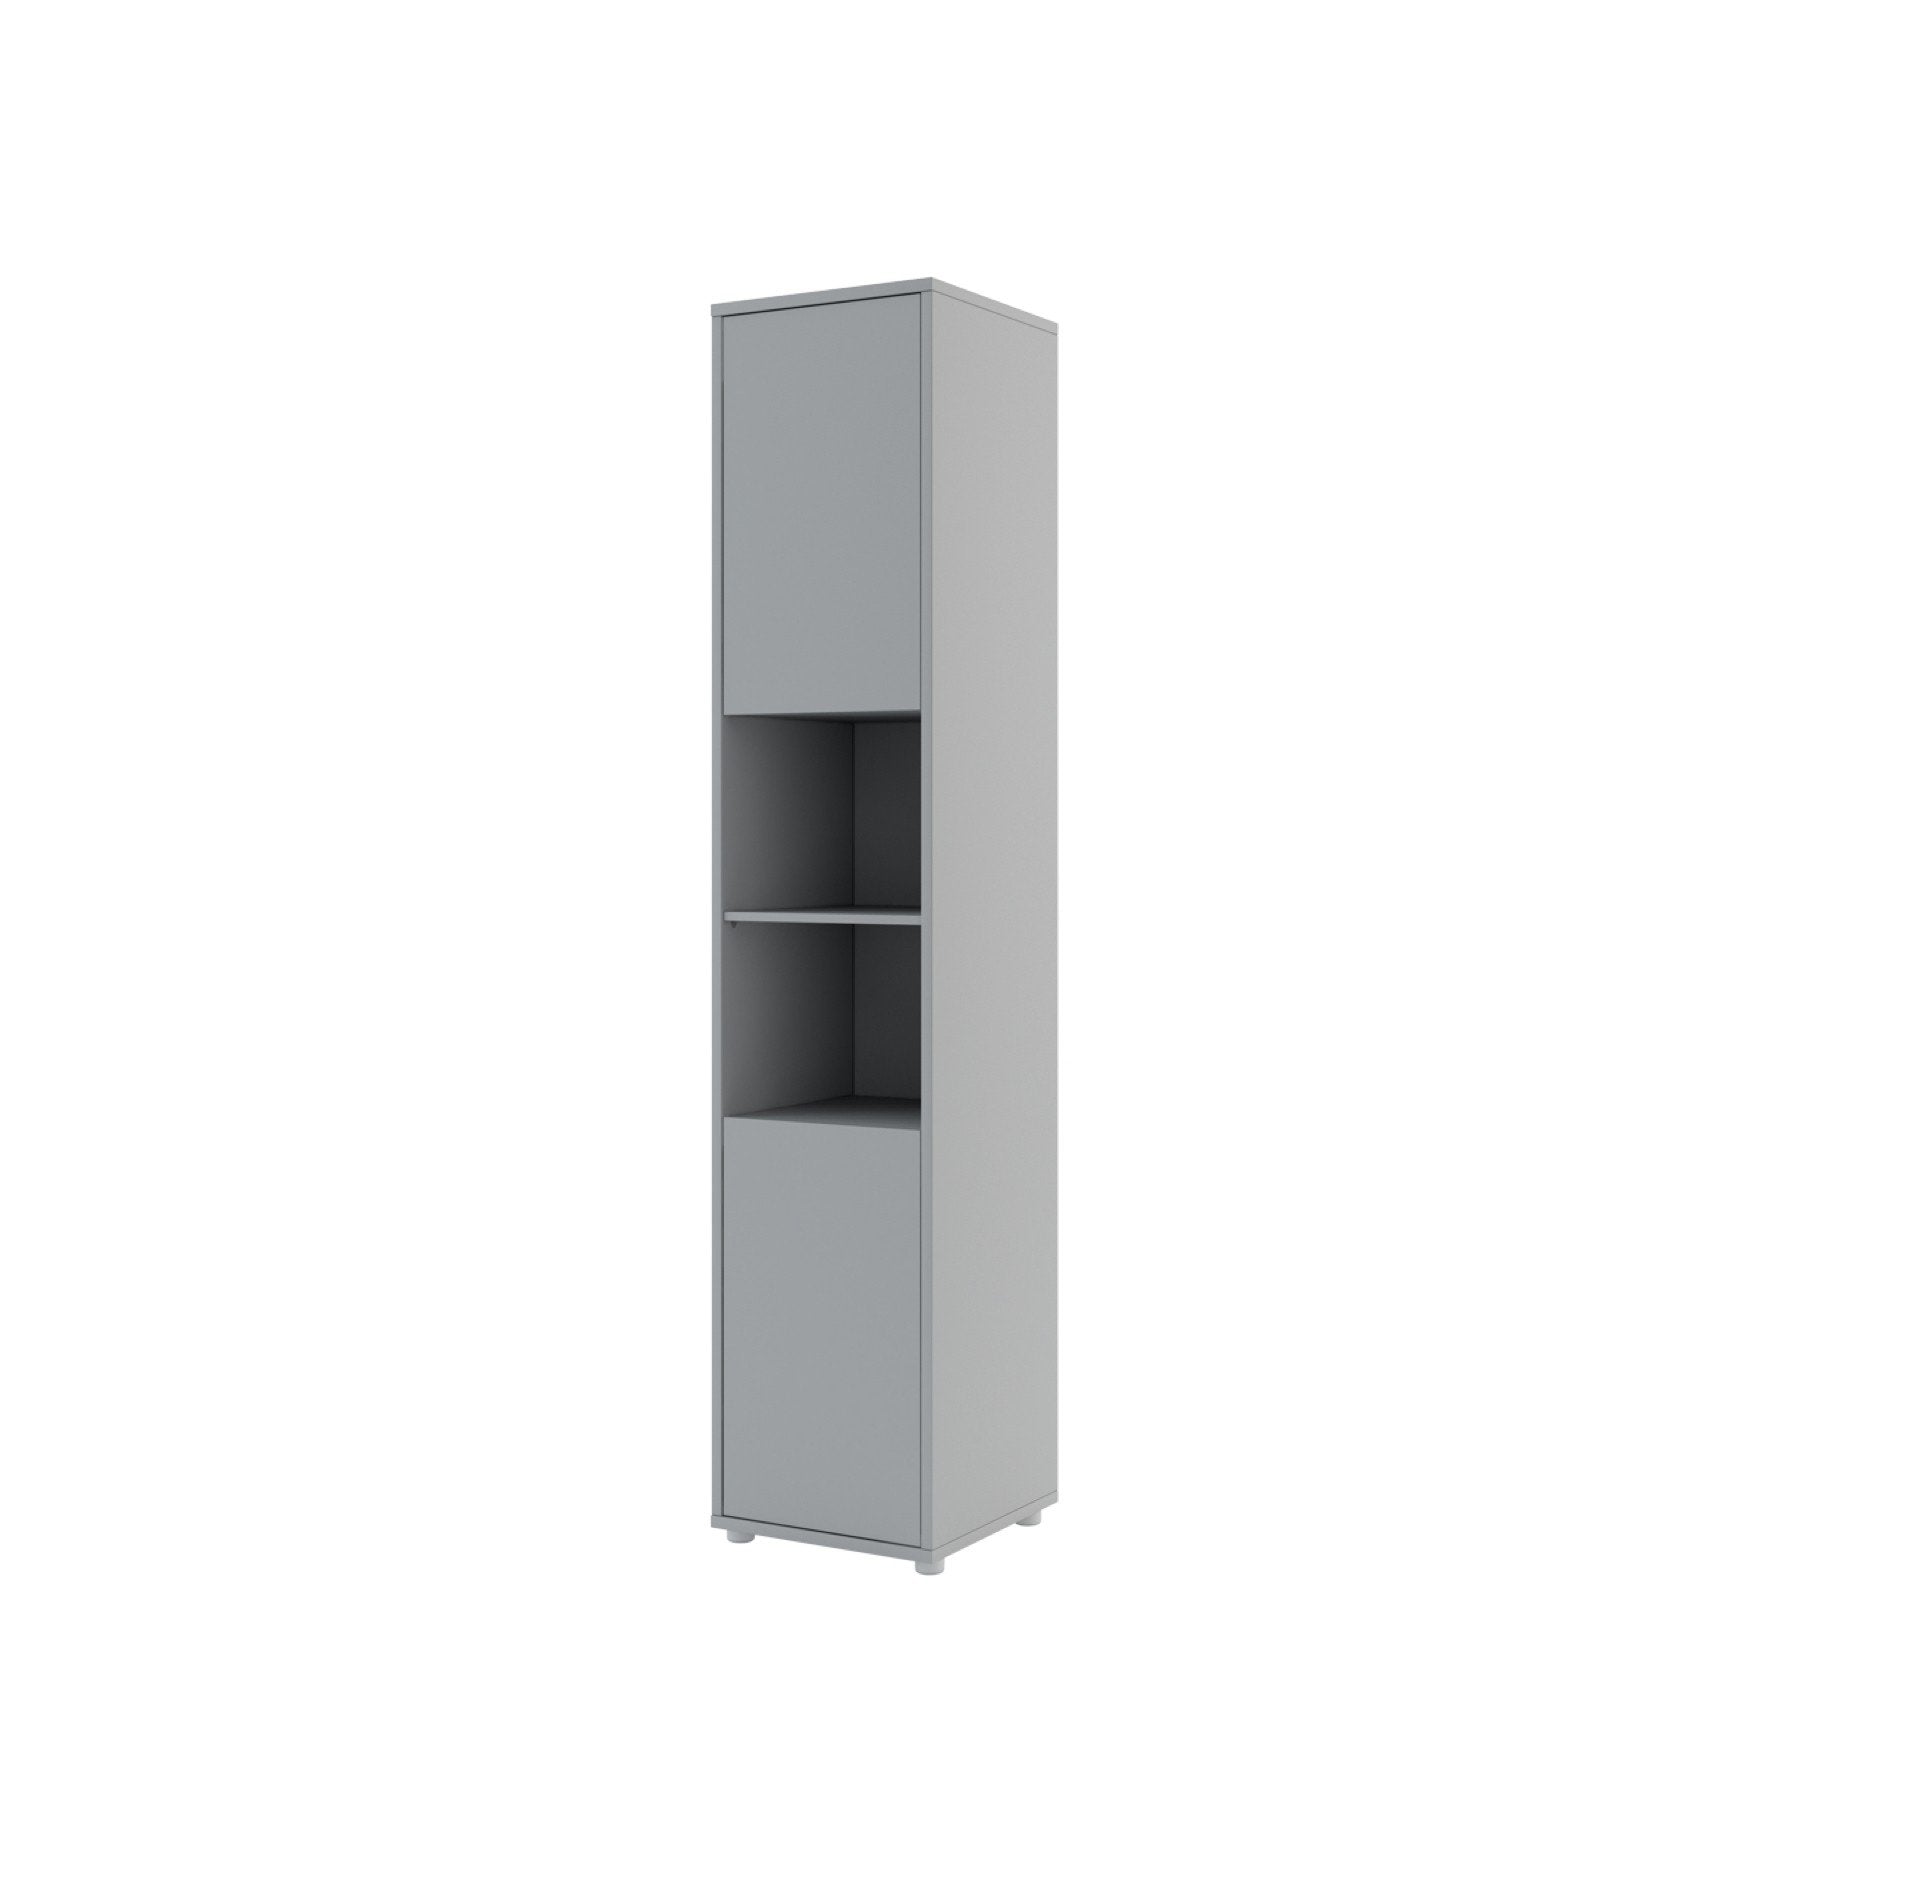 View BC08 Tall Storage Cabinet for Vertical Wall Bed Murphy Bed Concept Grey Matt 45cm information